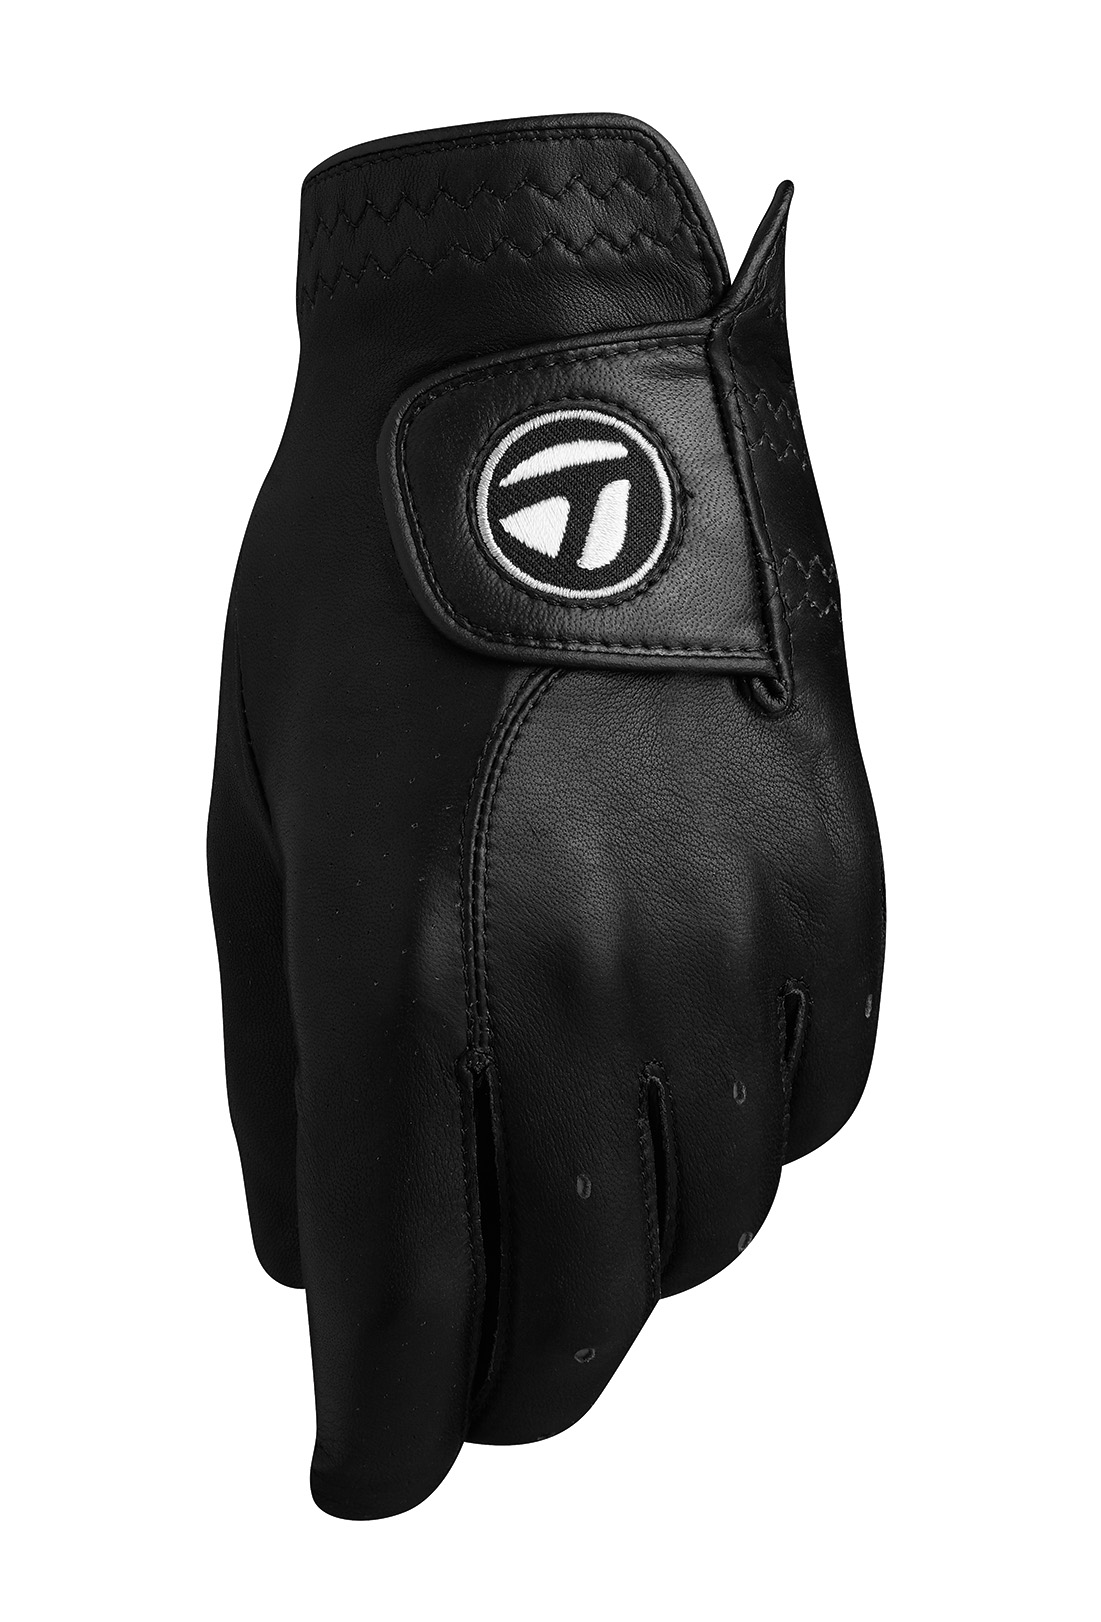 TaylorMade TP Vivid Glove Right Hand Large Black